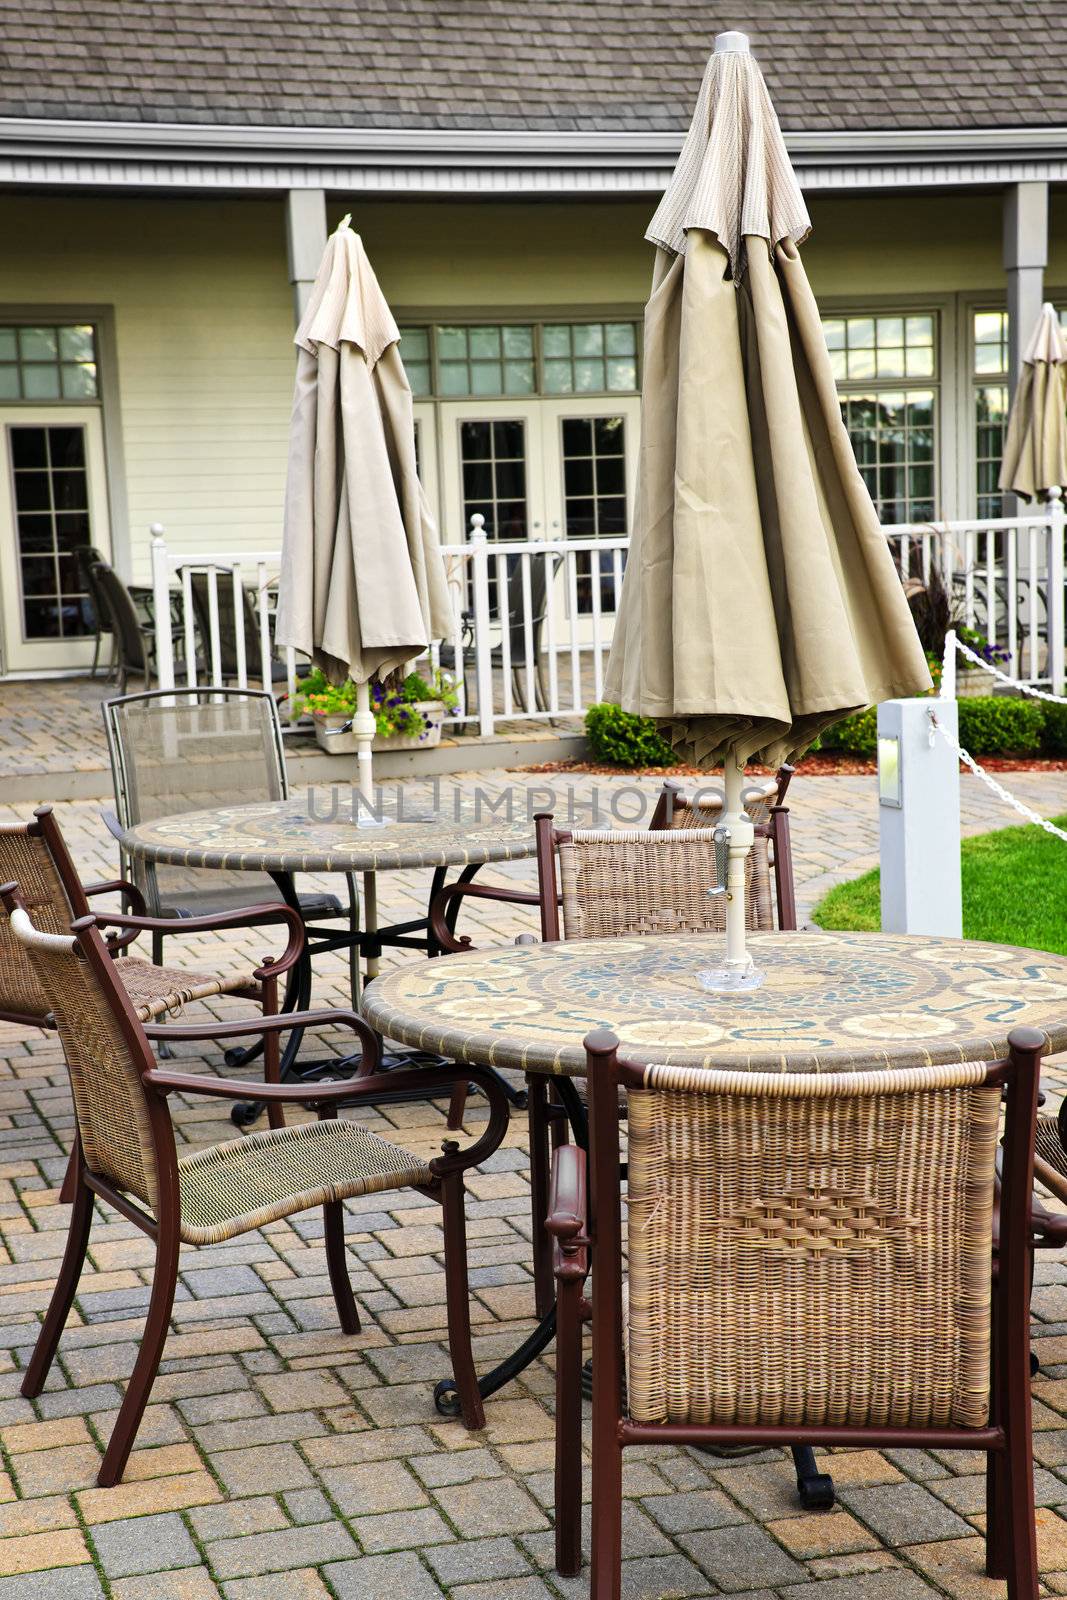 Patio furniture with tables chairs and umbrellas